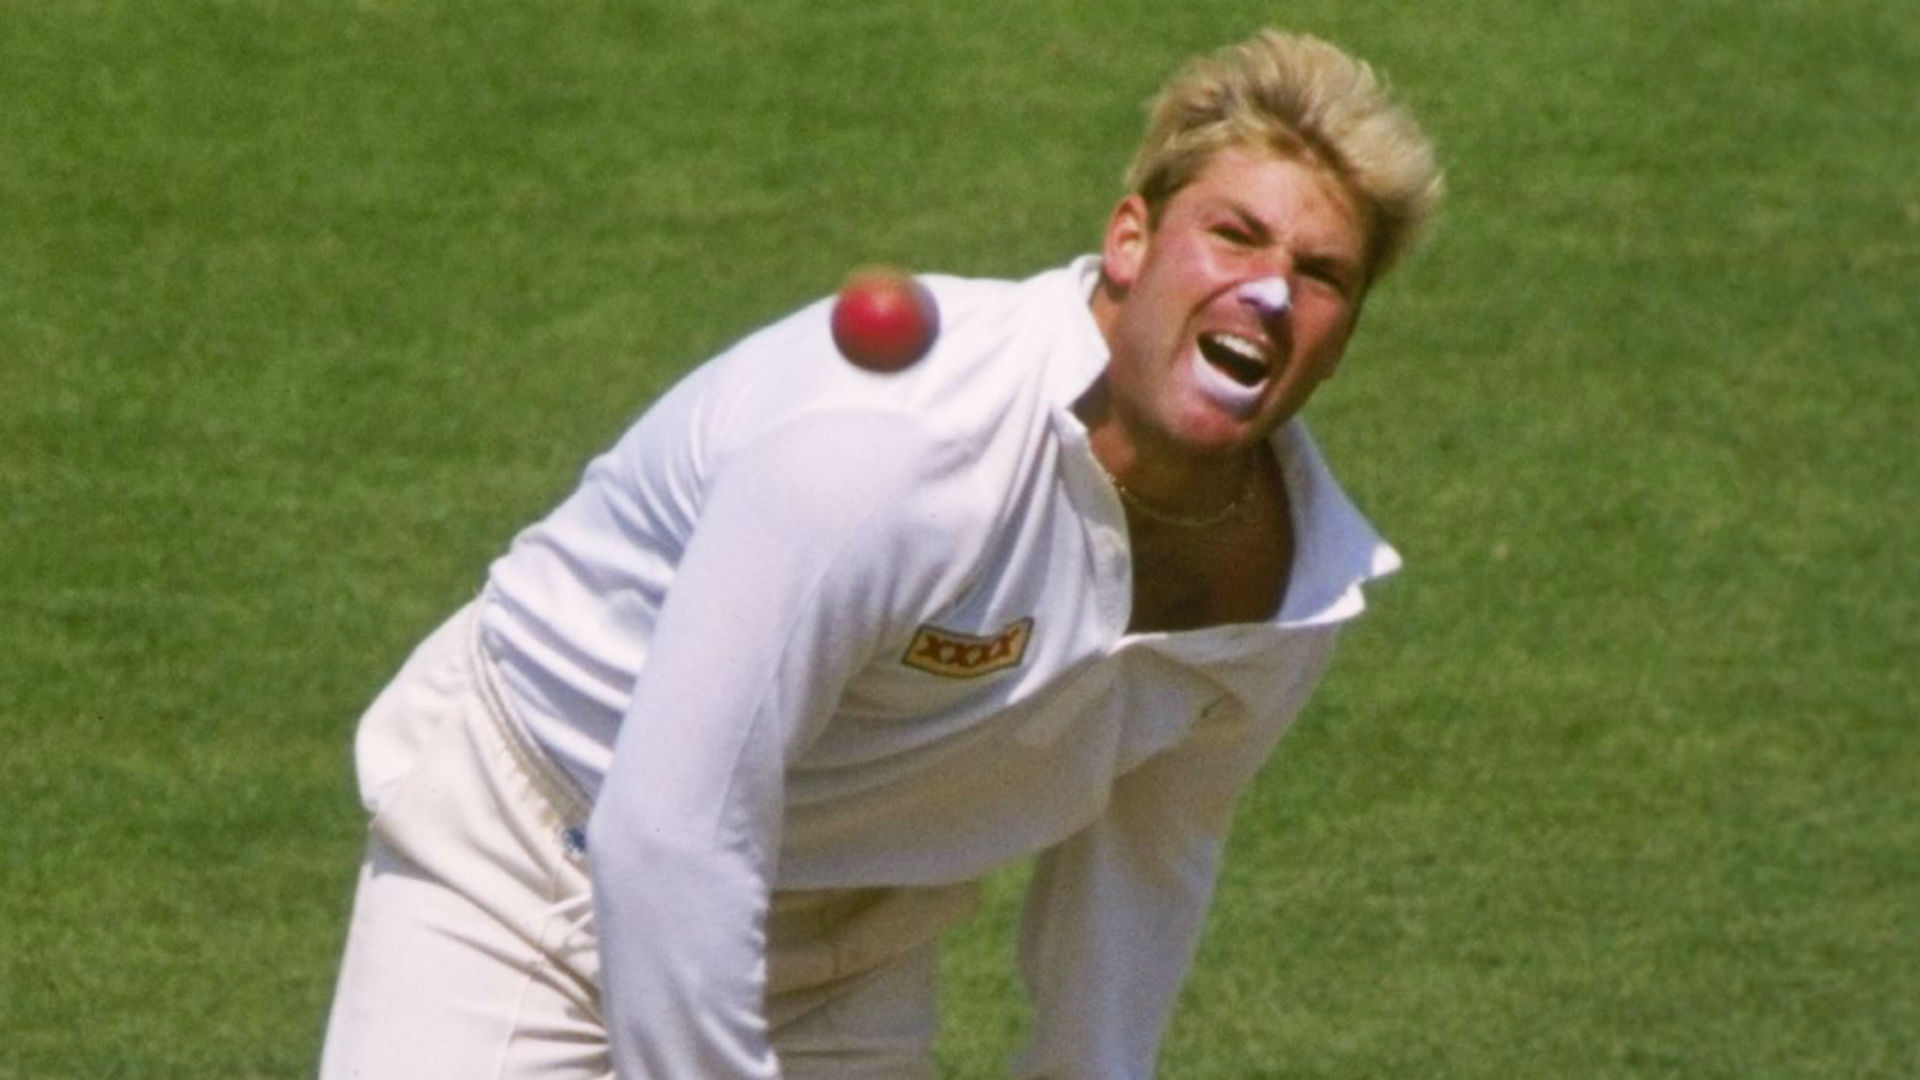 With his first Ashes delivery on June 4, 1993, Shane Warne bamboozled Mike Gatting and cast his spell over England.